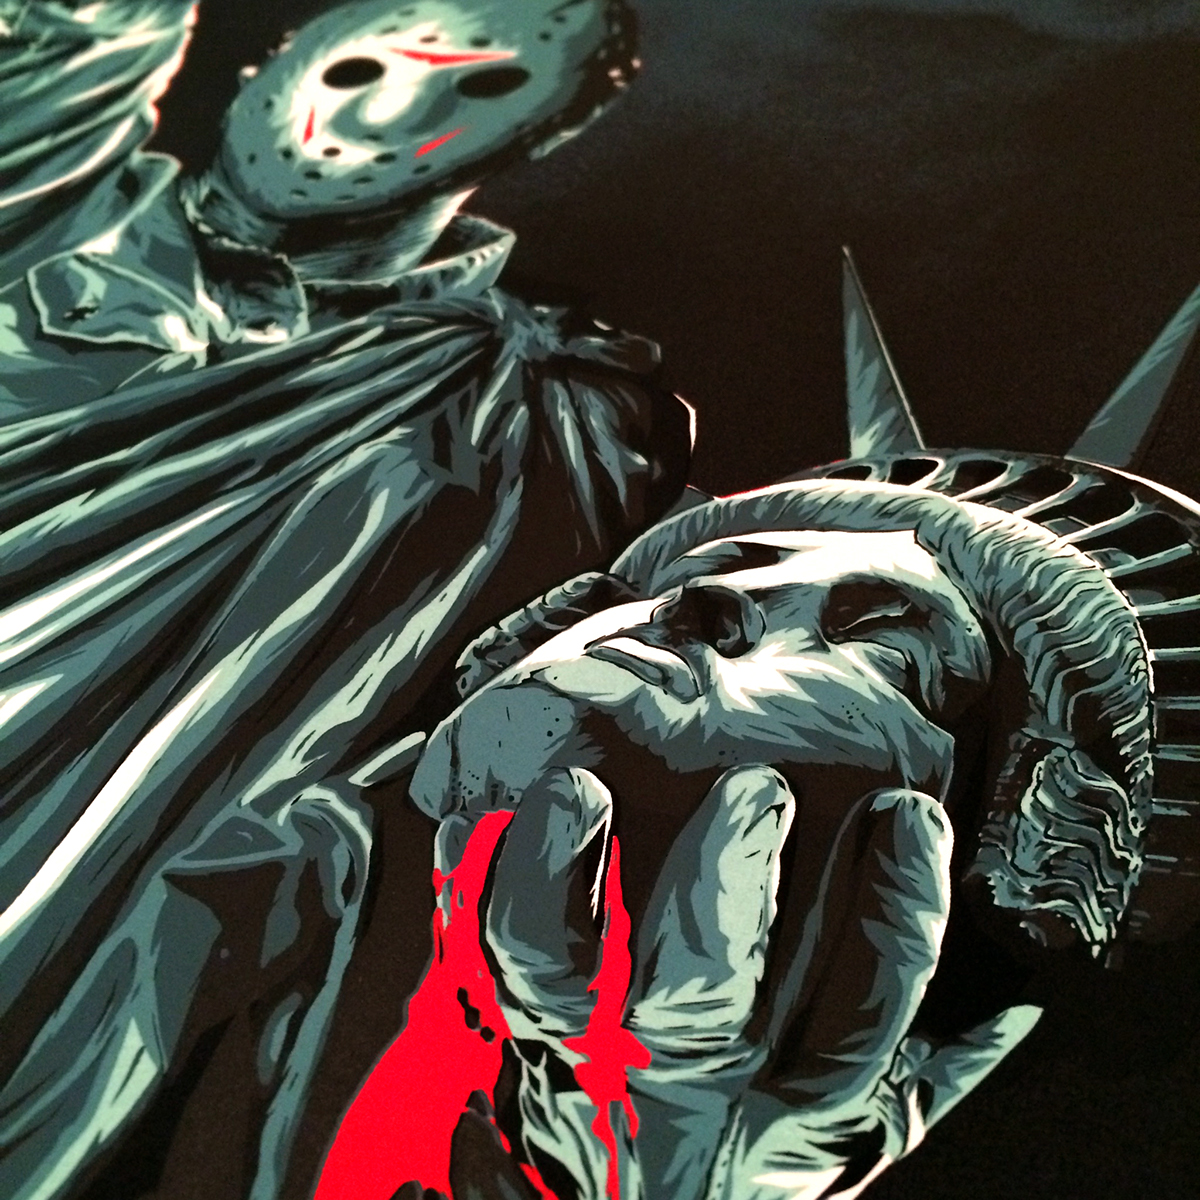 jason Friday The 13th Voorhees poster Screen-print horror nyc